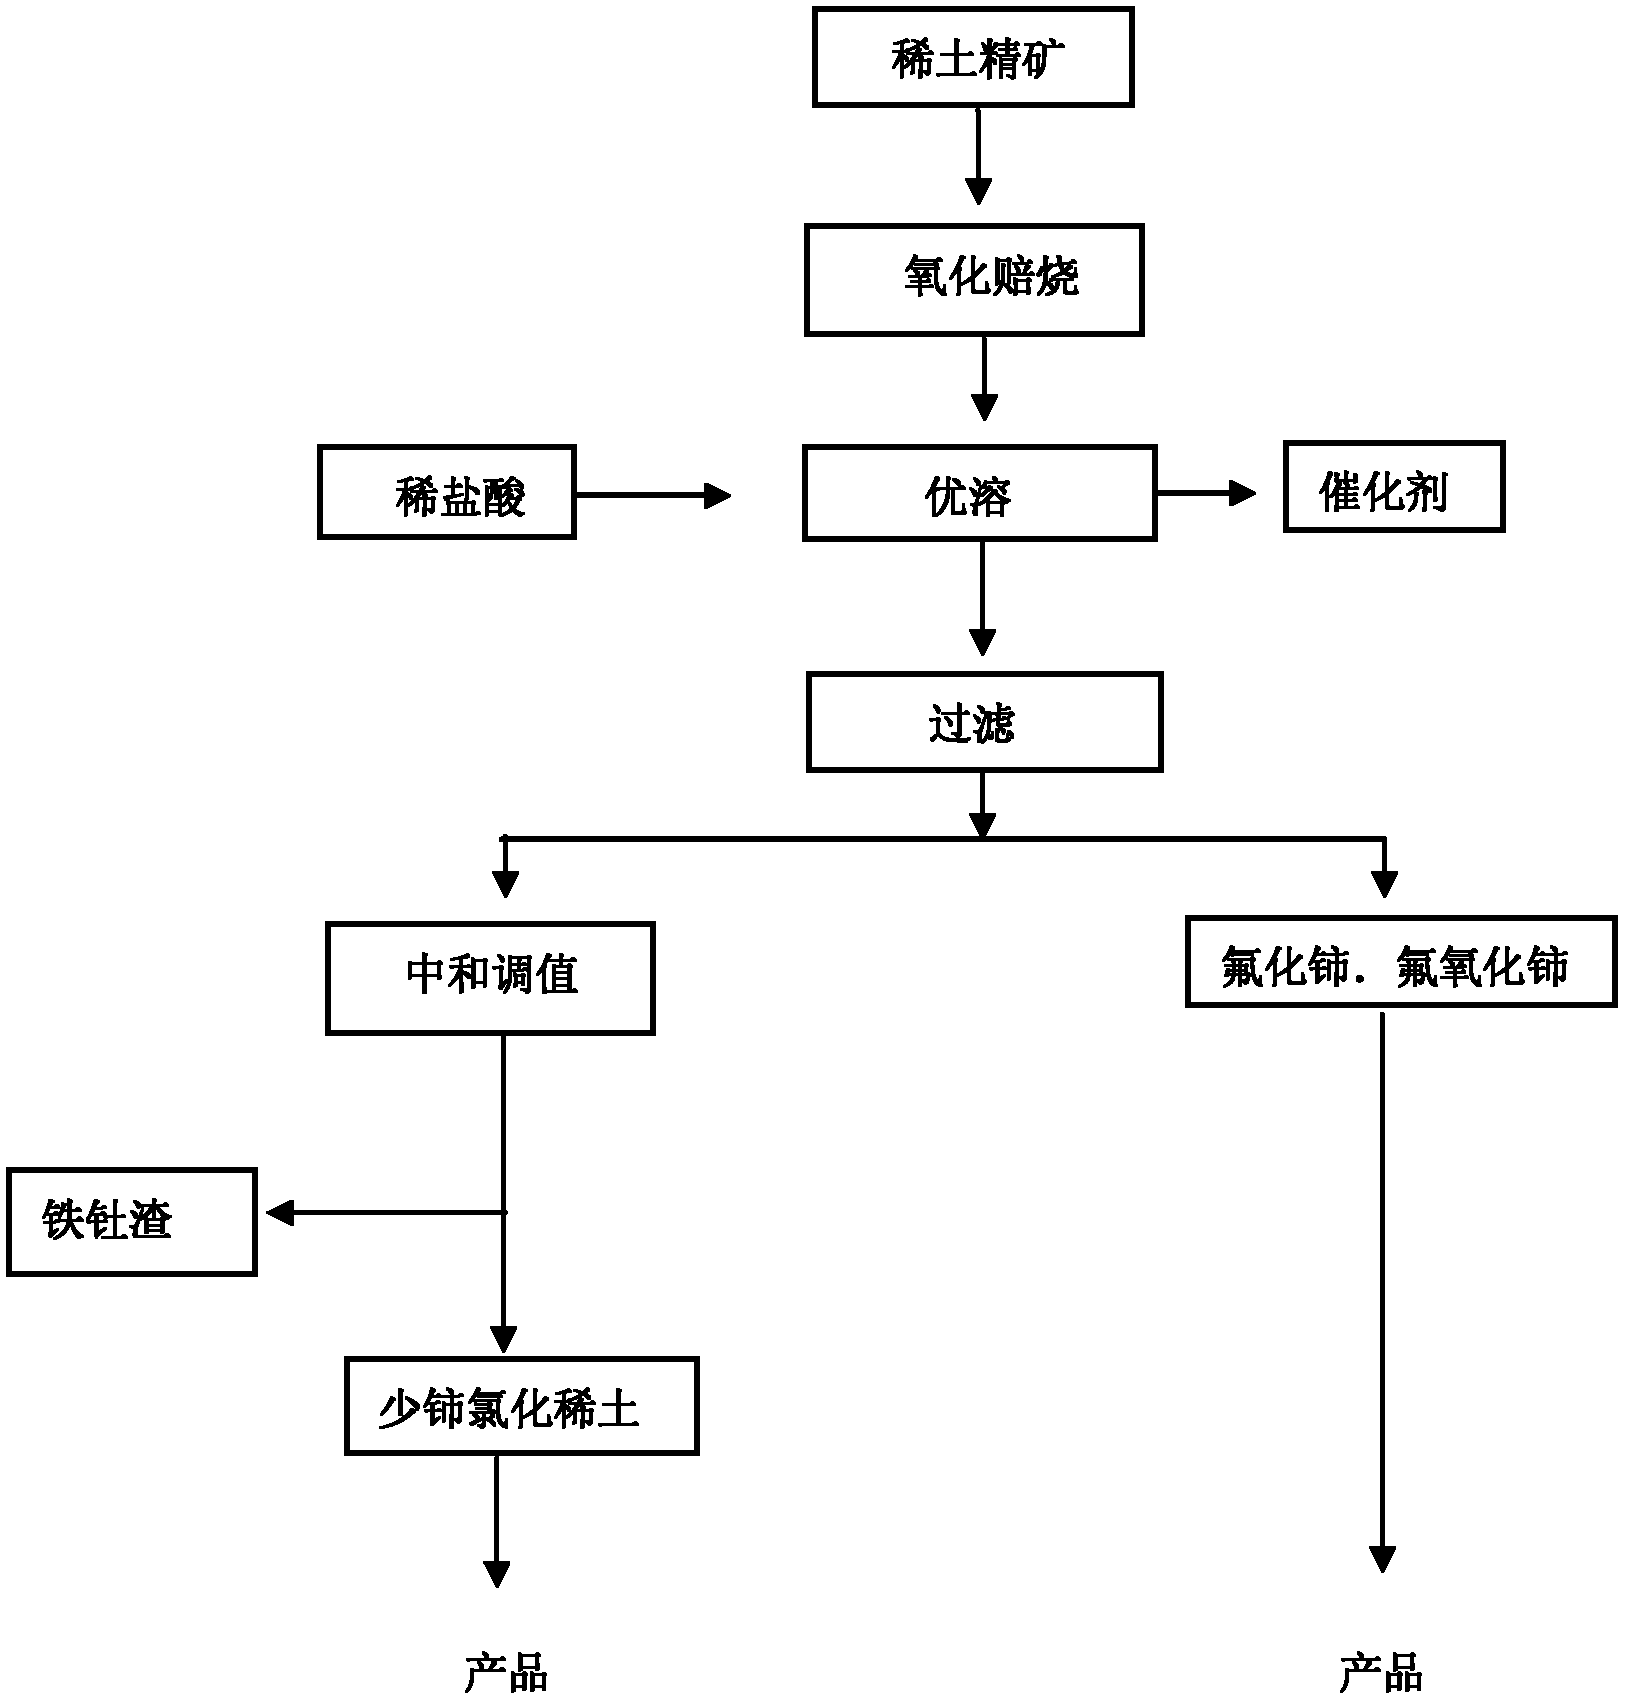 Method for comprehensively recycling various rare earth from rare earth materials containing fluorine